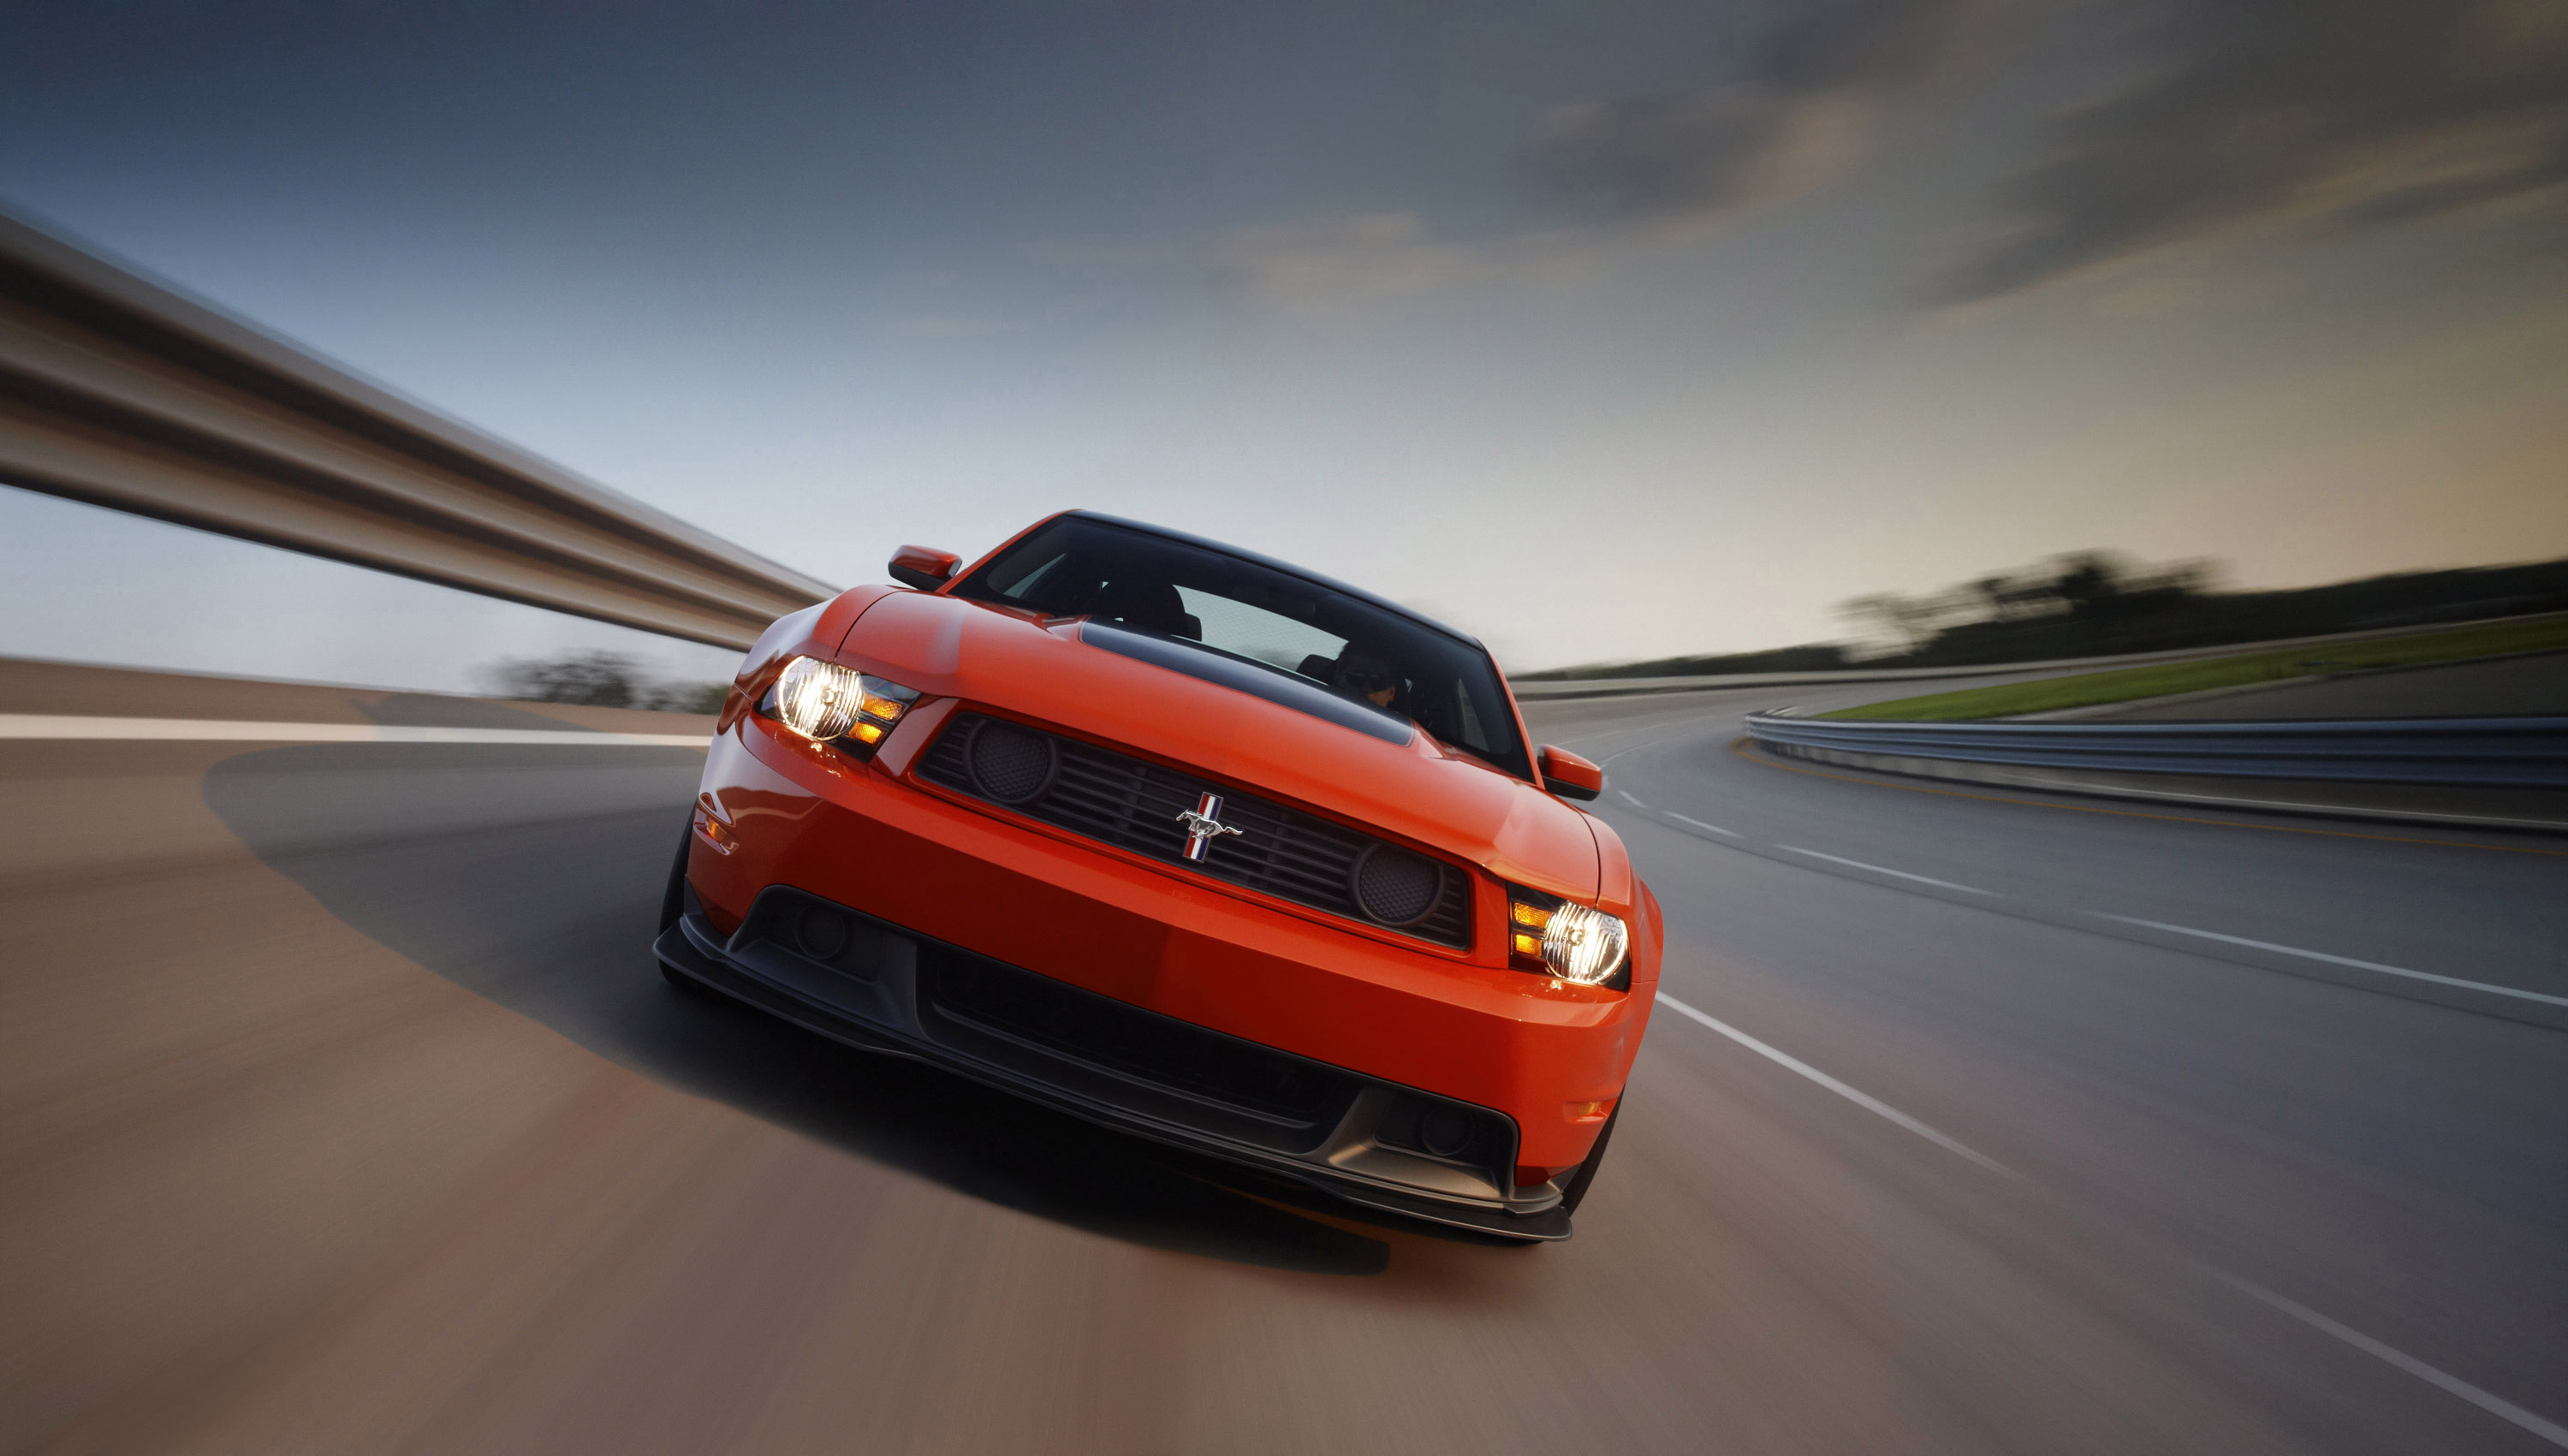 Ford Mustang Boss 302S Wallpapers